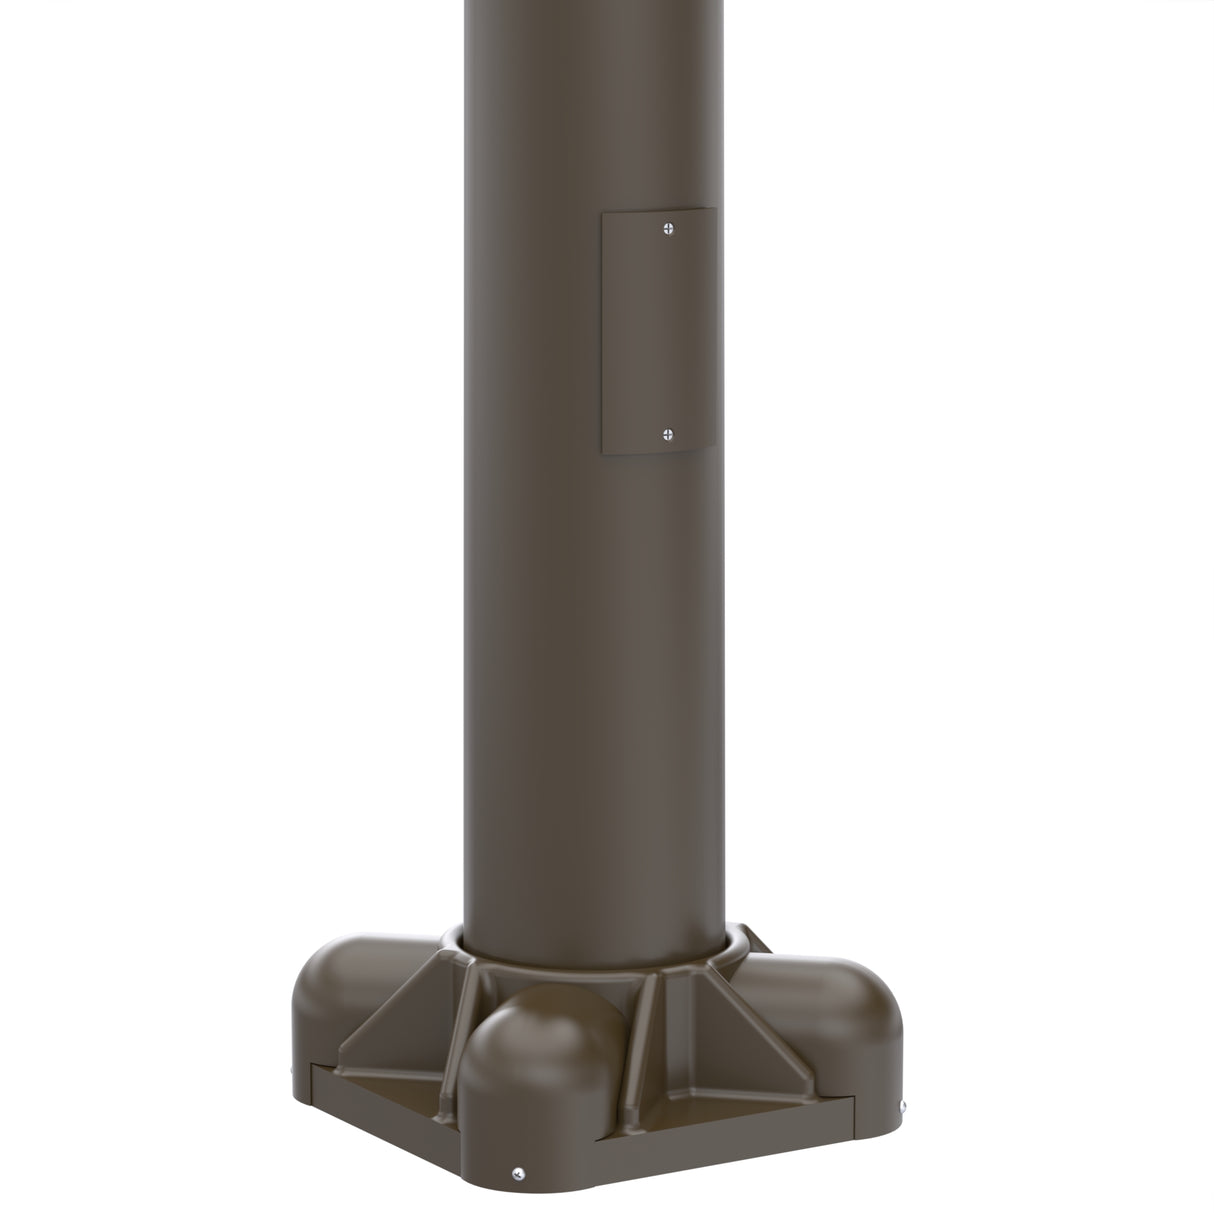 39' Tall x 8.0" Base OD x 4.5" Top OD x 0.188" Thick, Round Tapered Aluminum, Anchor Base Light Pole